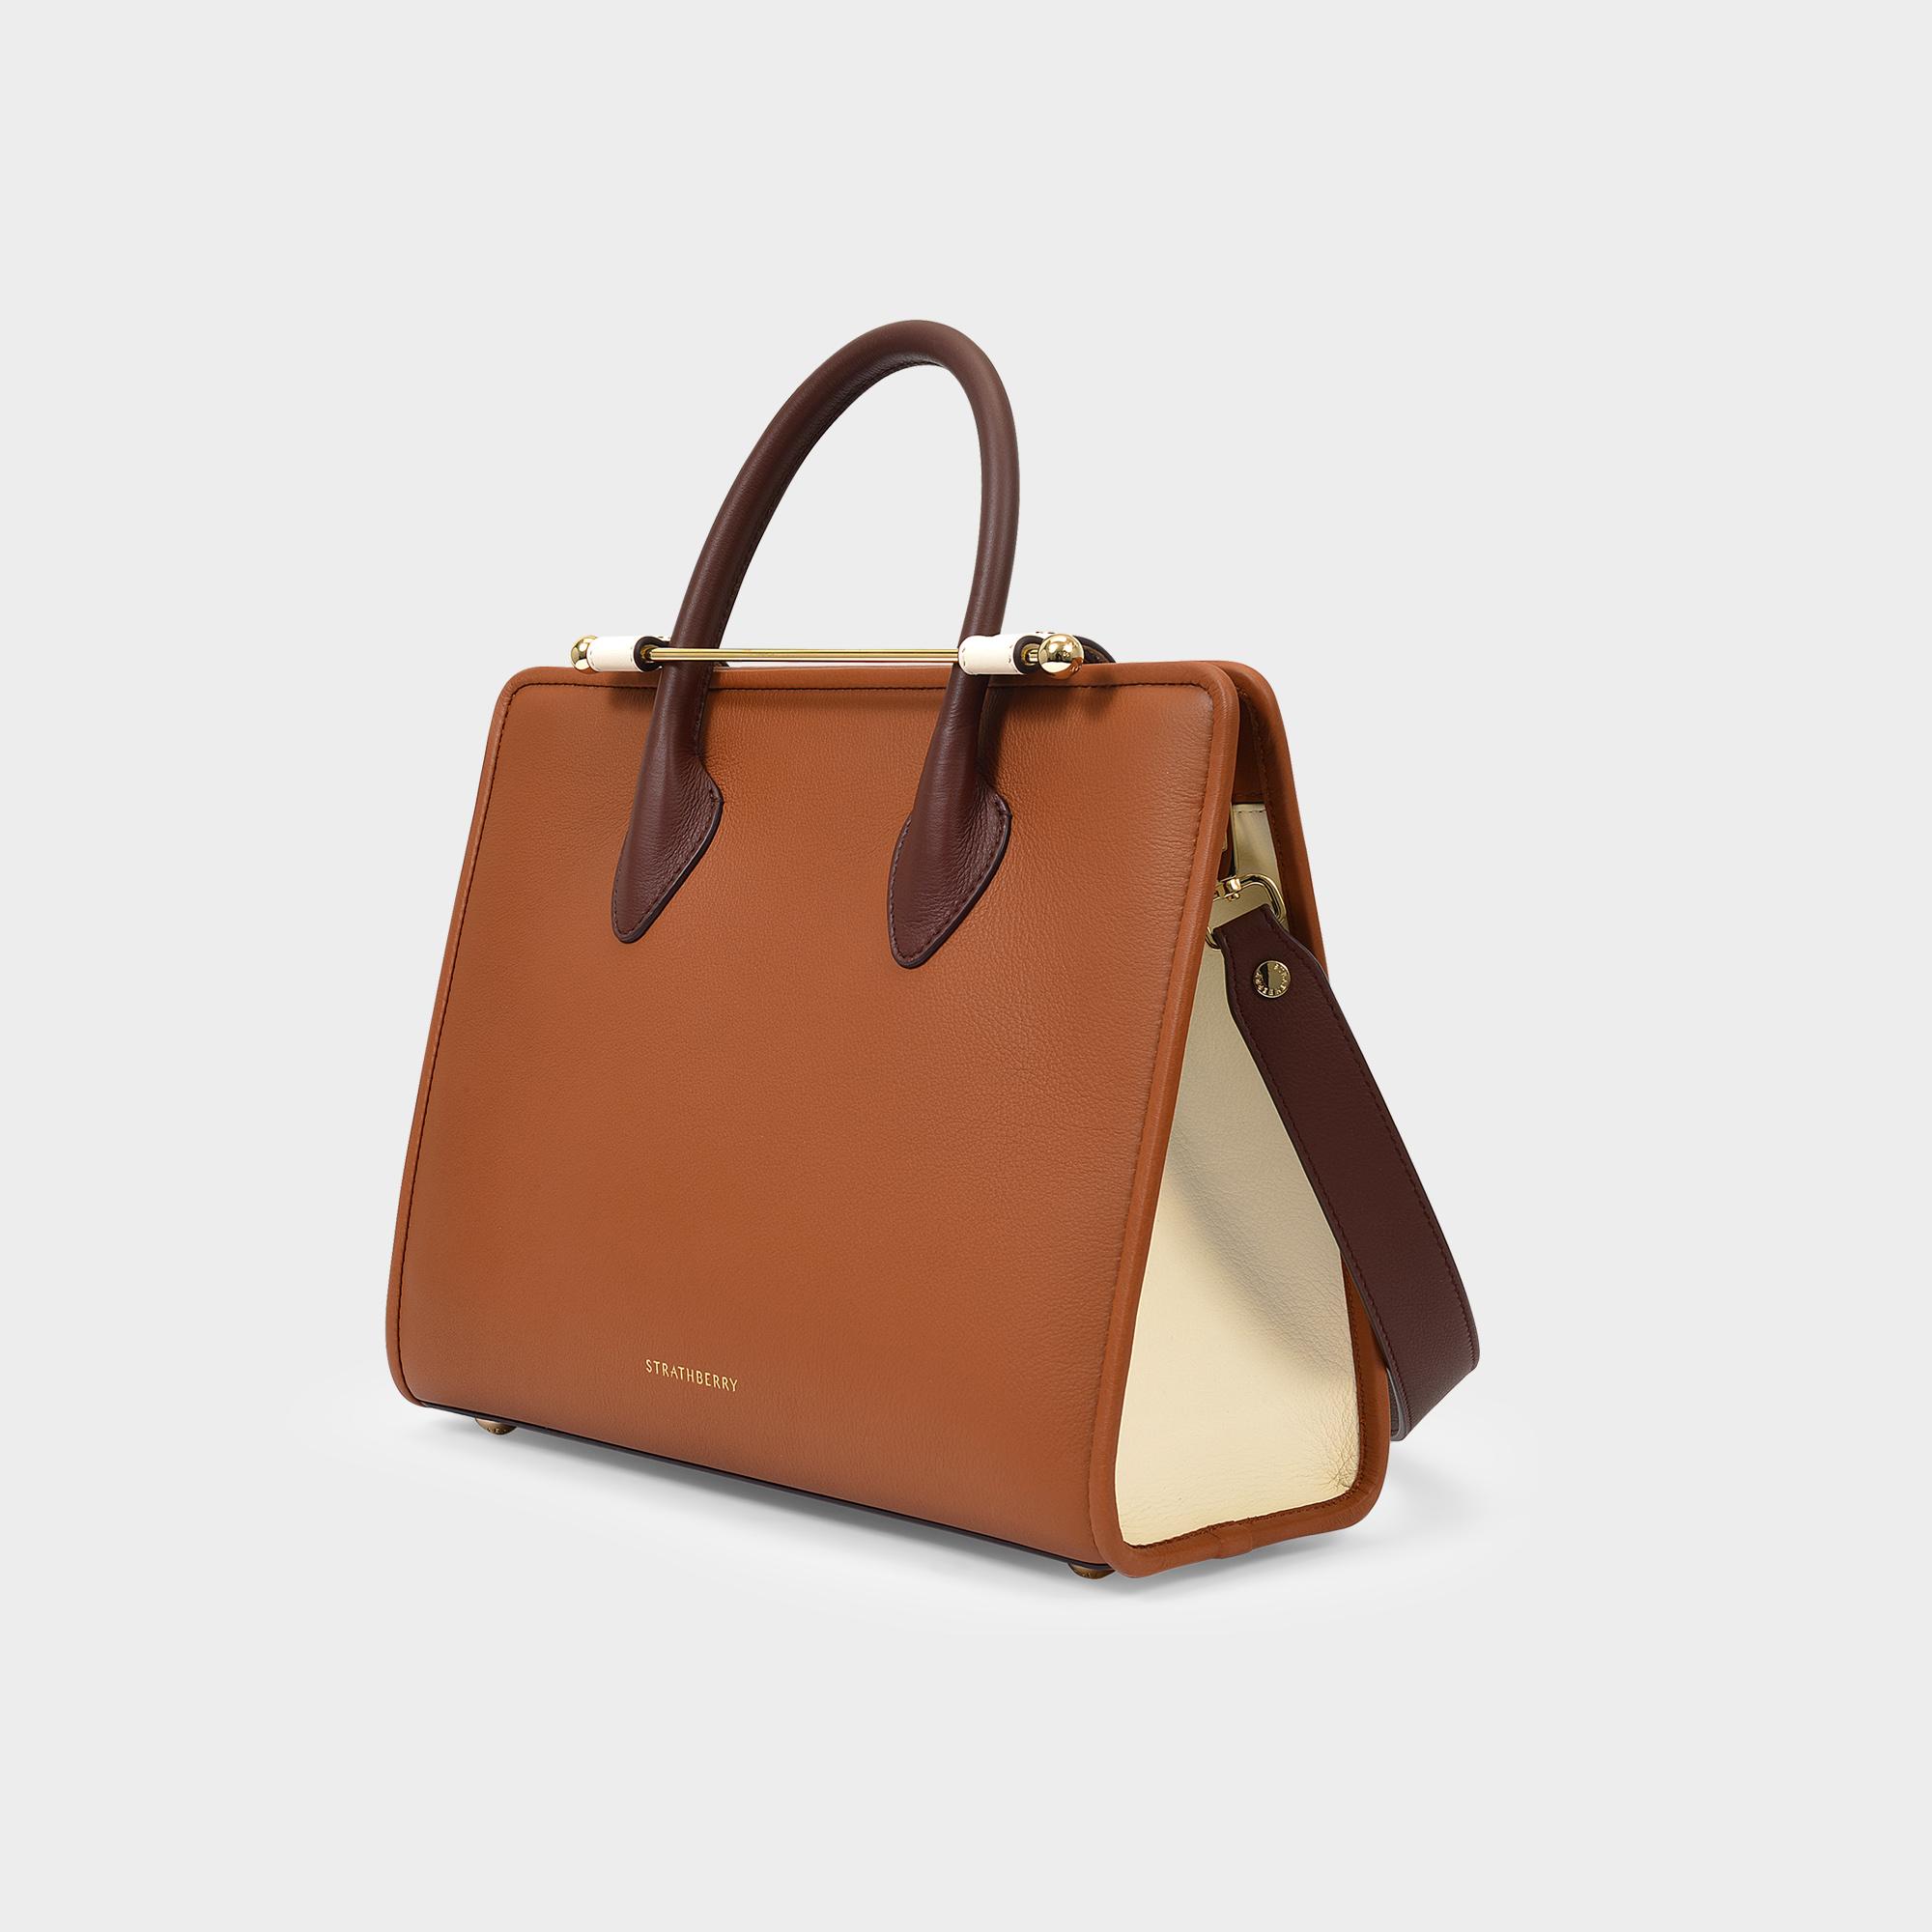 Strathberry Leather The Midi Tote In Chestnut, Vanilla And 